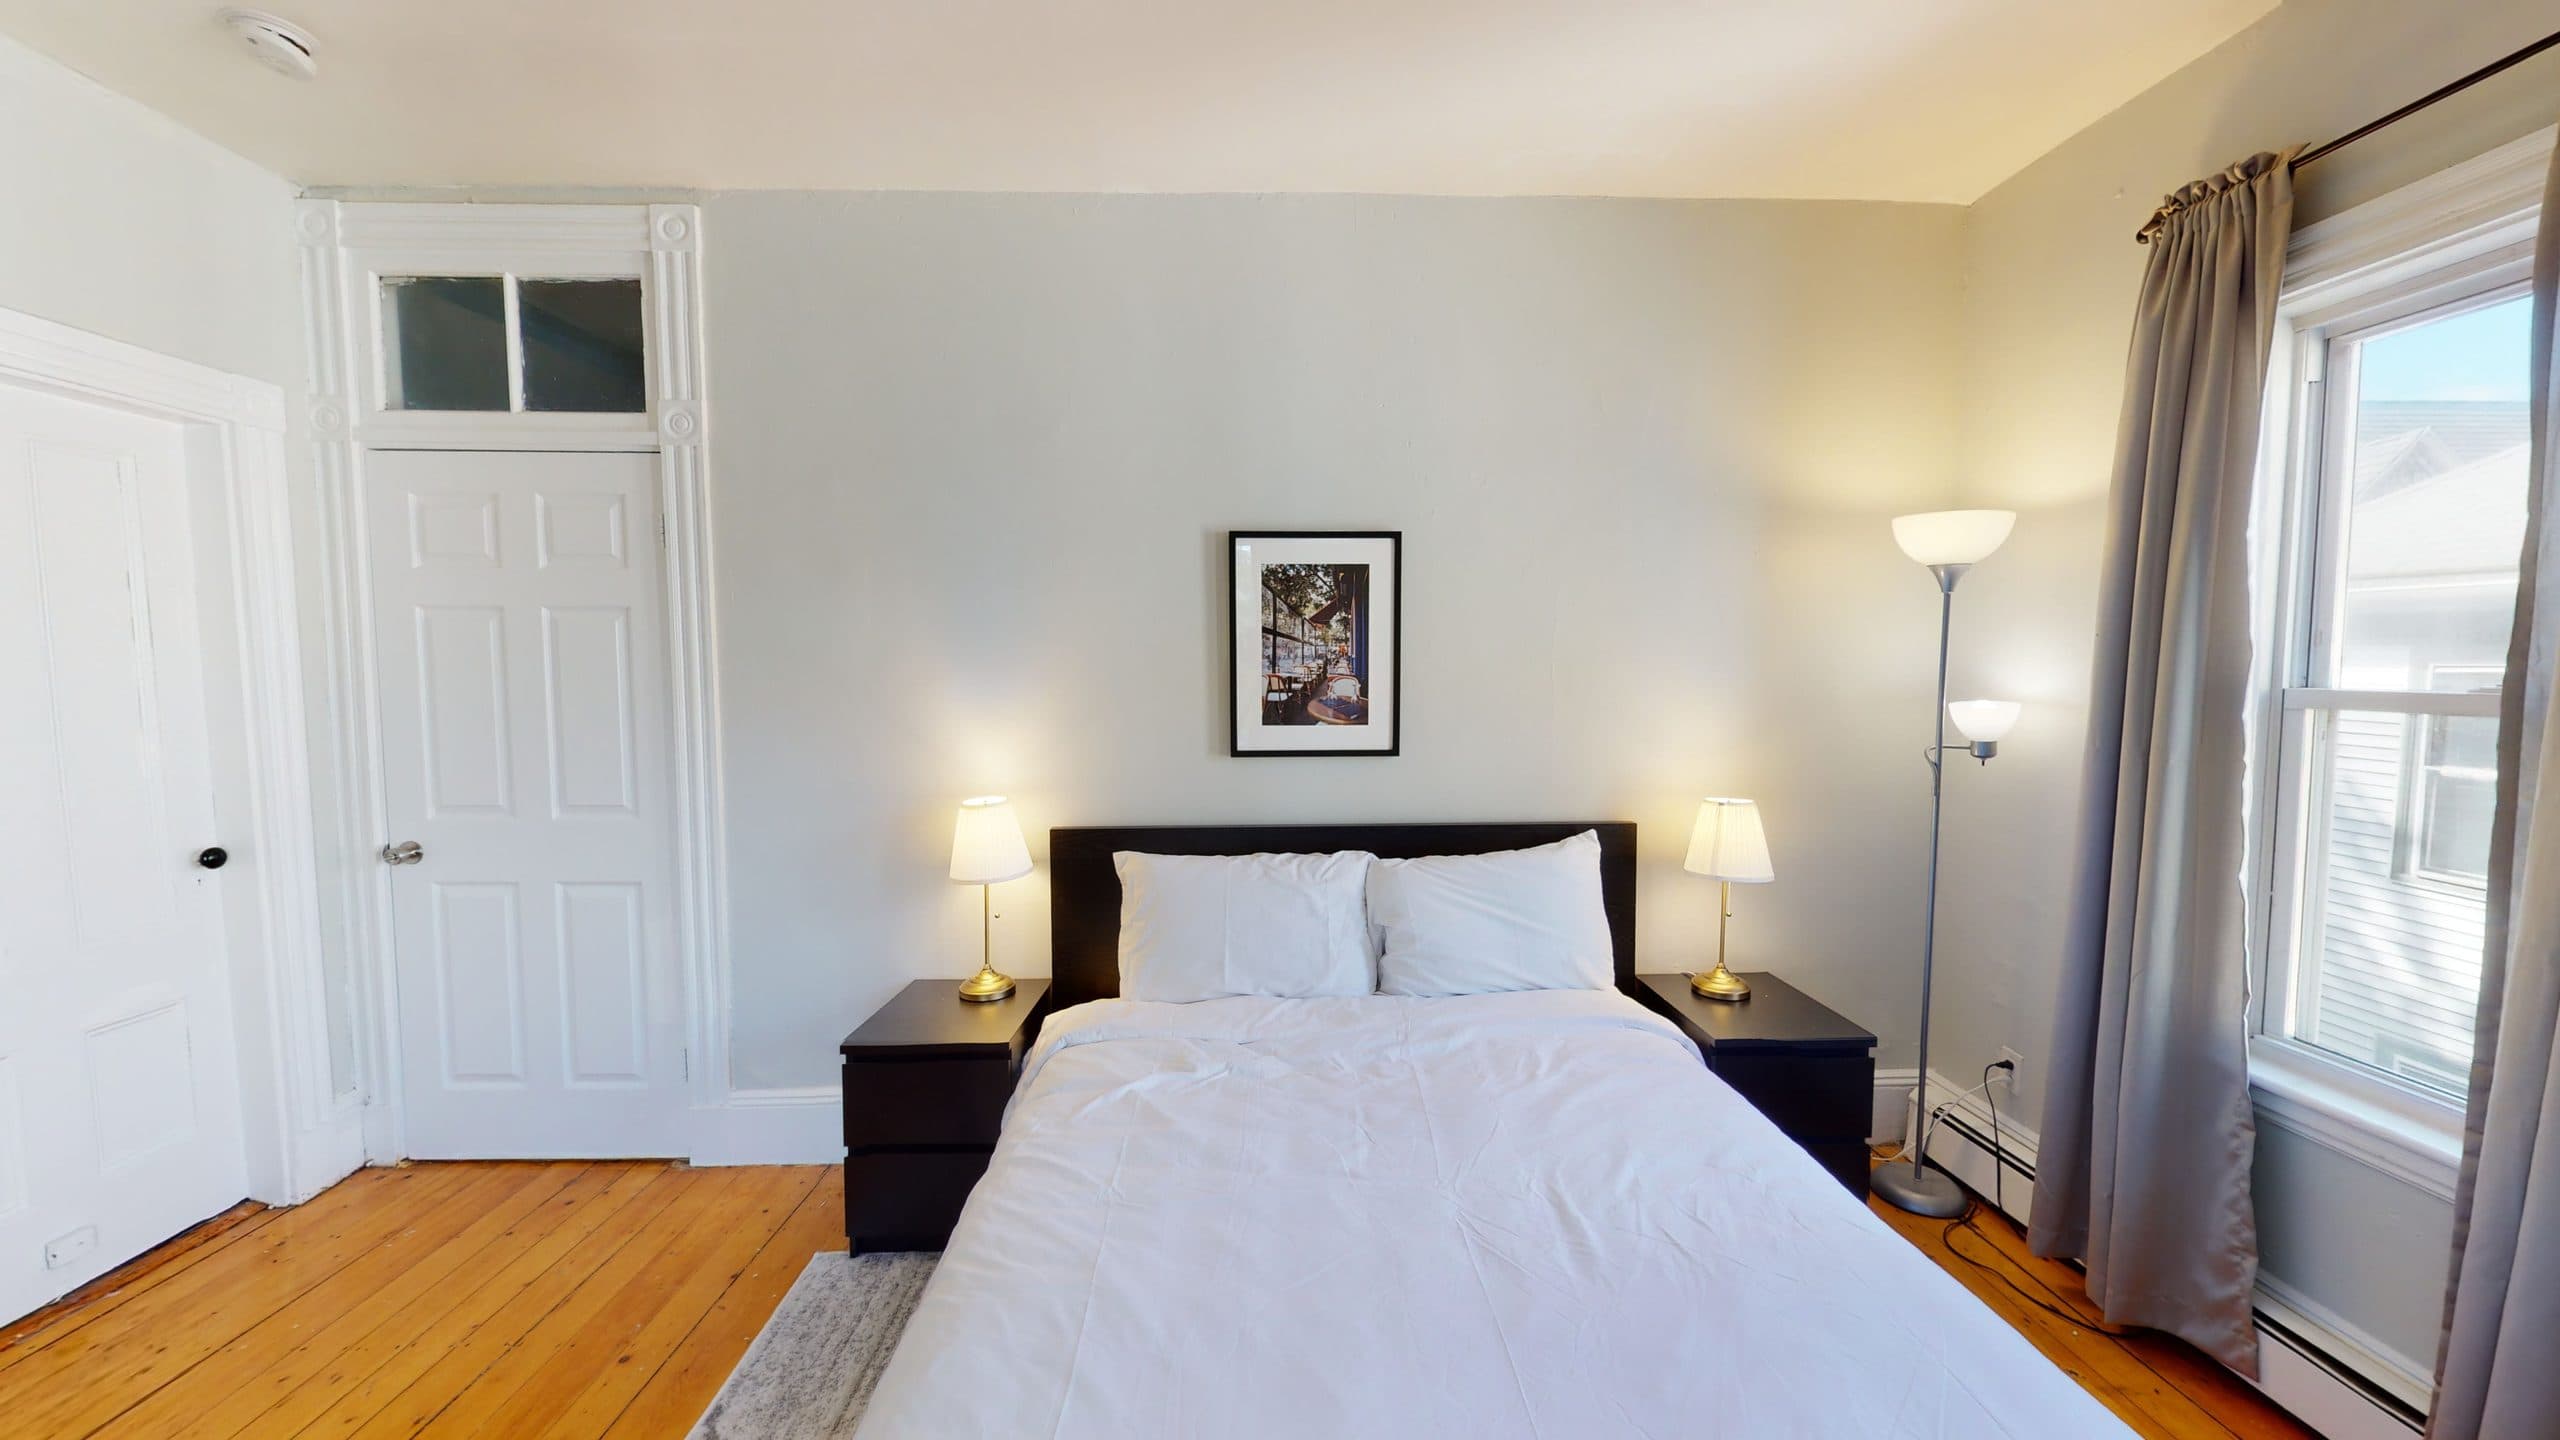 Photo 12 of #1206: Queen Bedroom A at June Homes